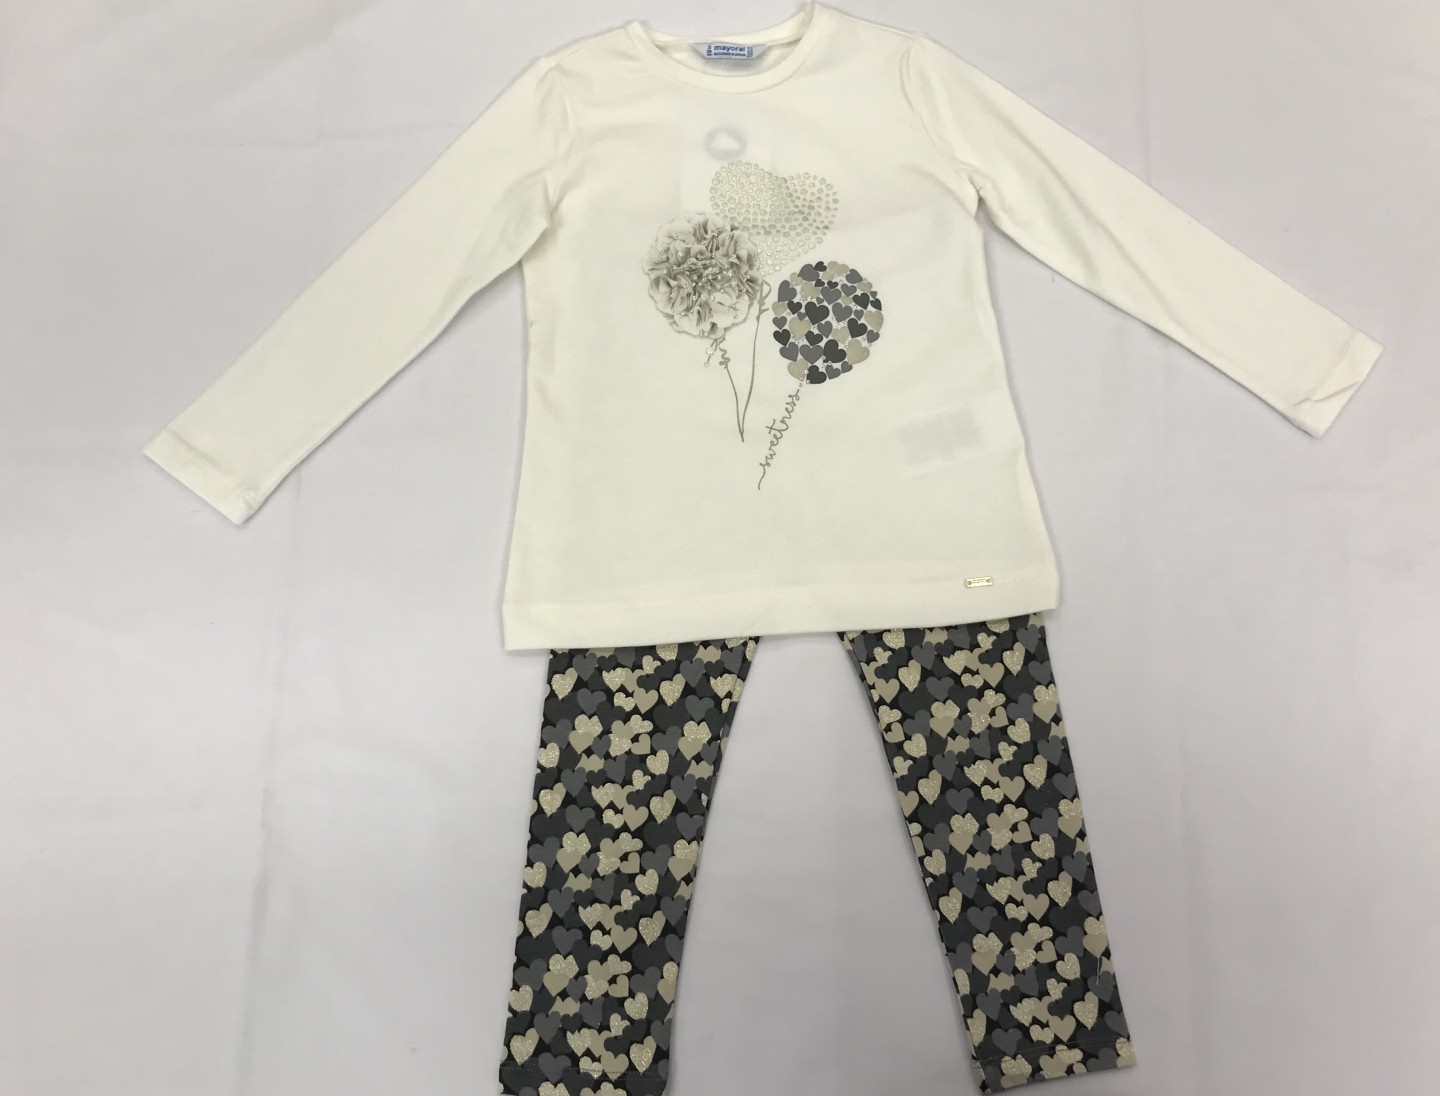 MAYORAL 4064 IVORY, GREY AND GOLD GLITTER HEARTS TOP AND LEGGINGS